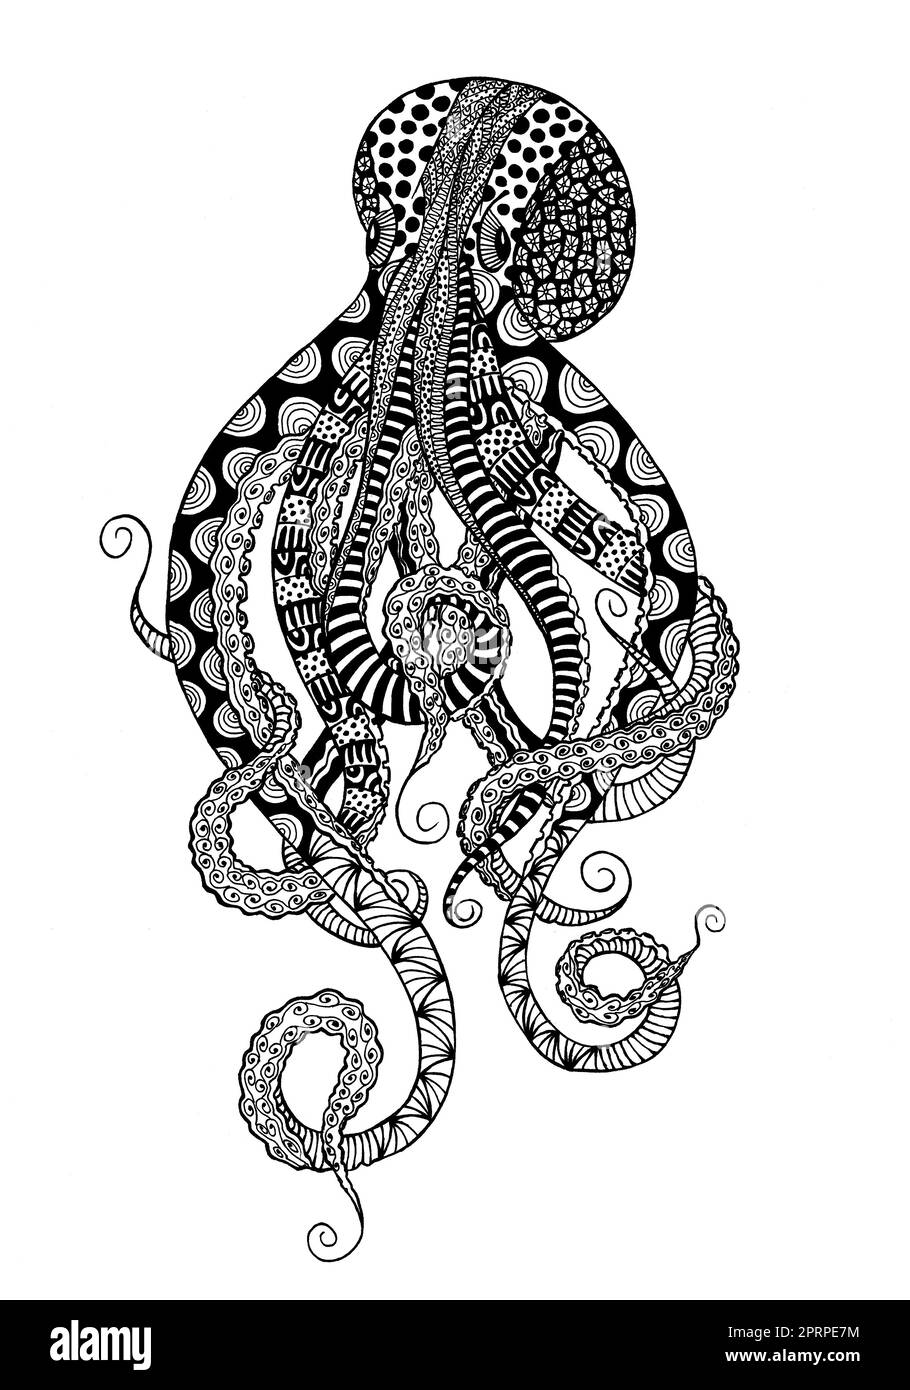 Doodle octopus sketch hand drawn squid animal illustration coloring page poster or card tshirt print restaurant menu nautical vintage design ill stock photo